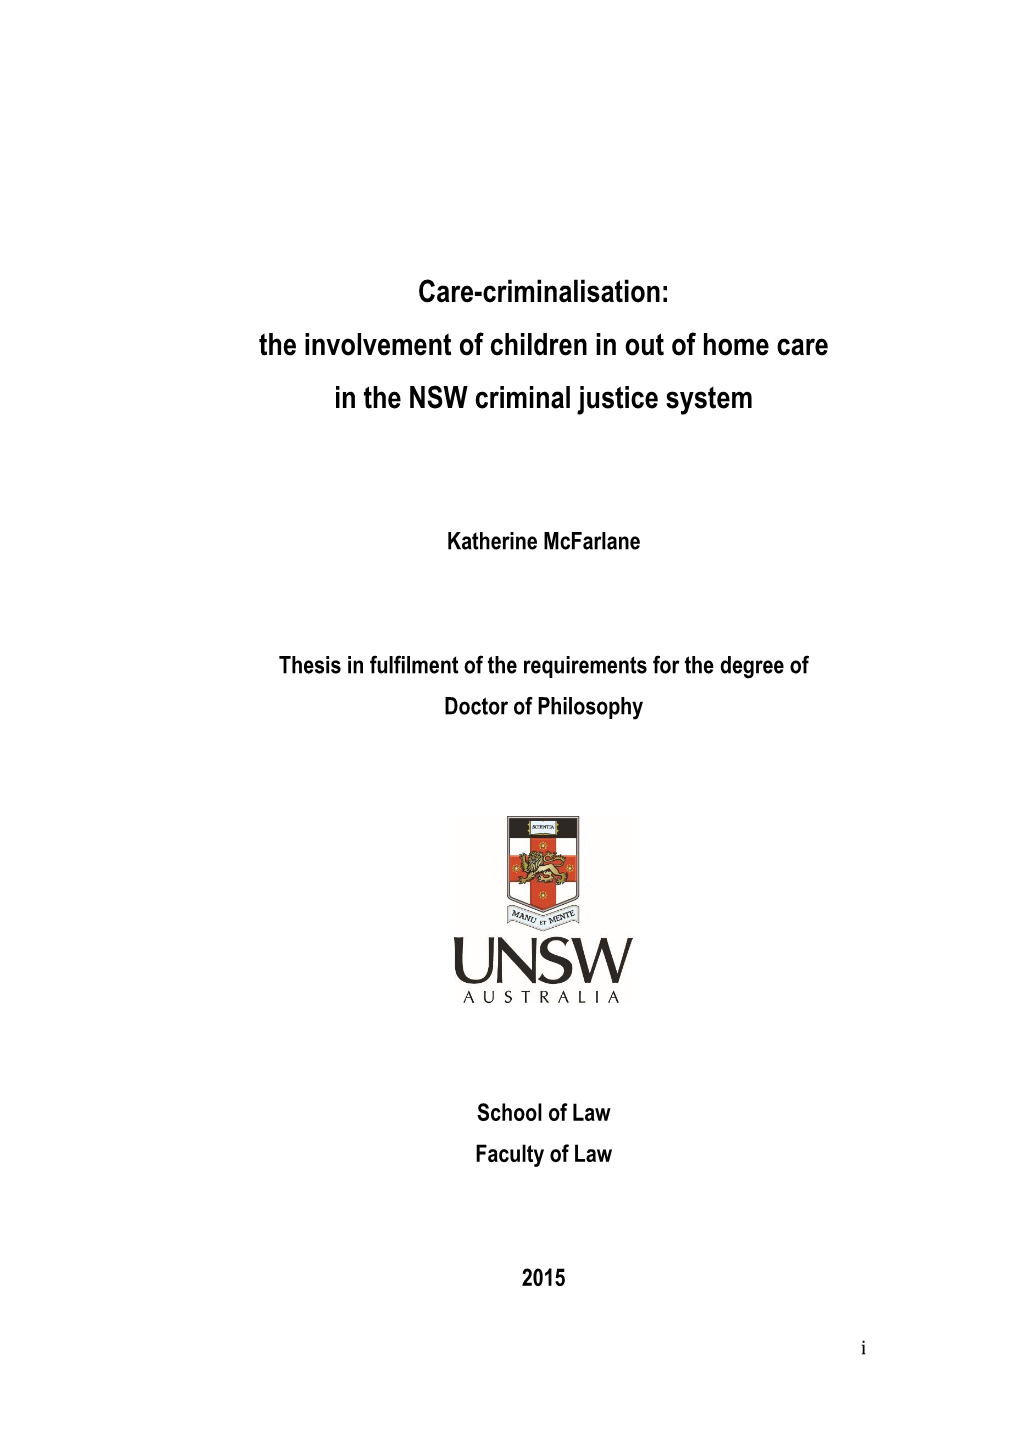 The Involvement of Children in out of Home Care in the NSW Criminal Justice System